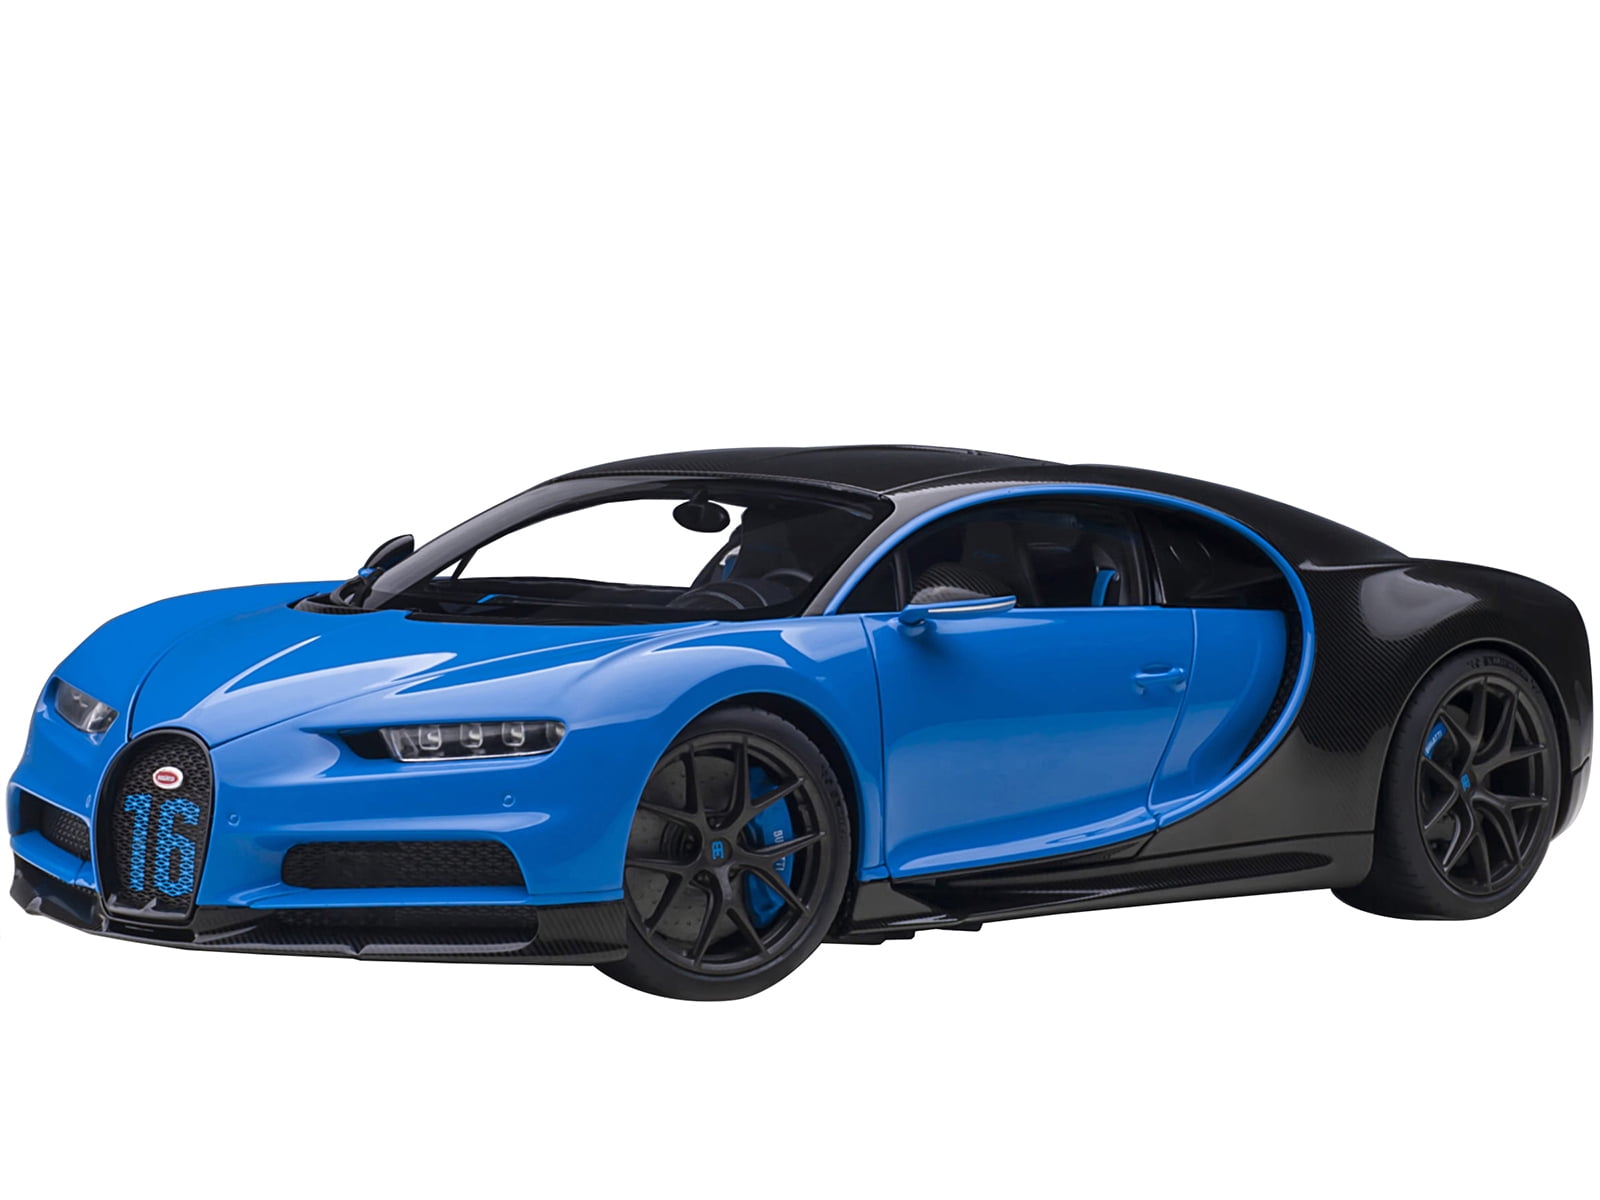 Picture of Autoart 70997 French Racing Blue & Carbon 1 by 18 Scale Model Car for 2019 Bugatti Chiron Sport